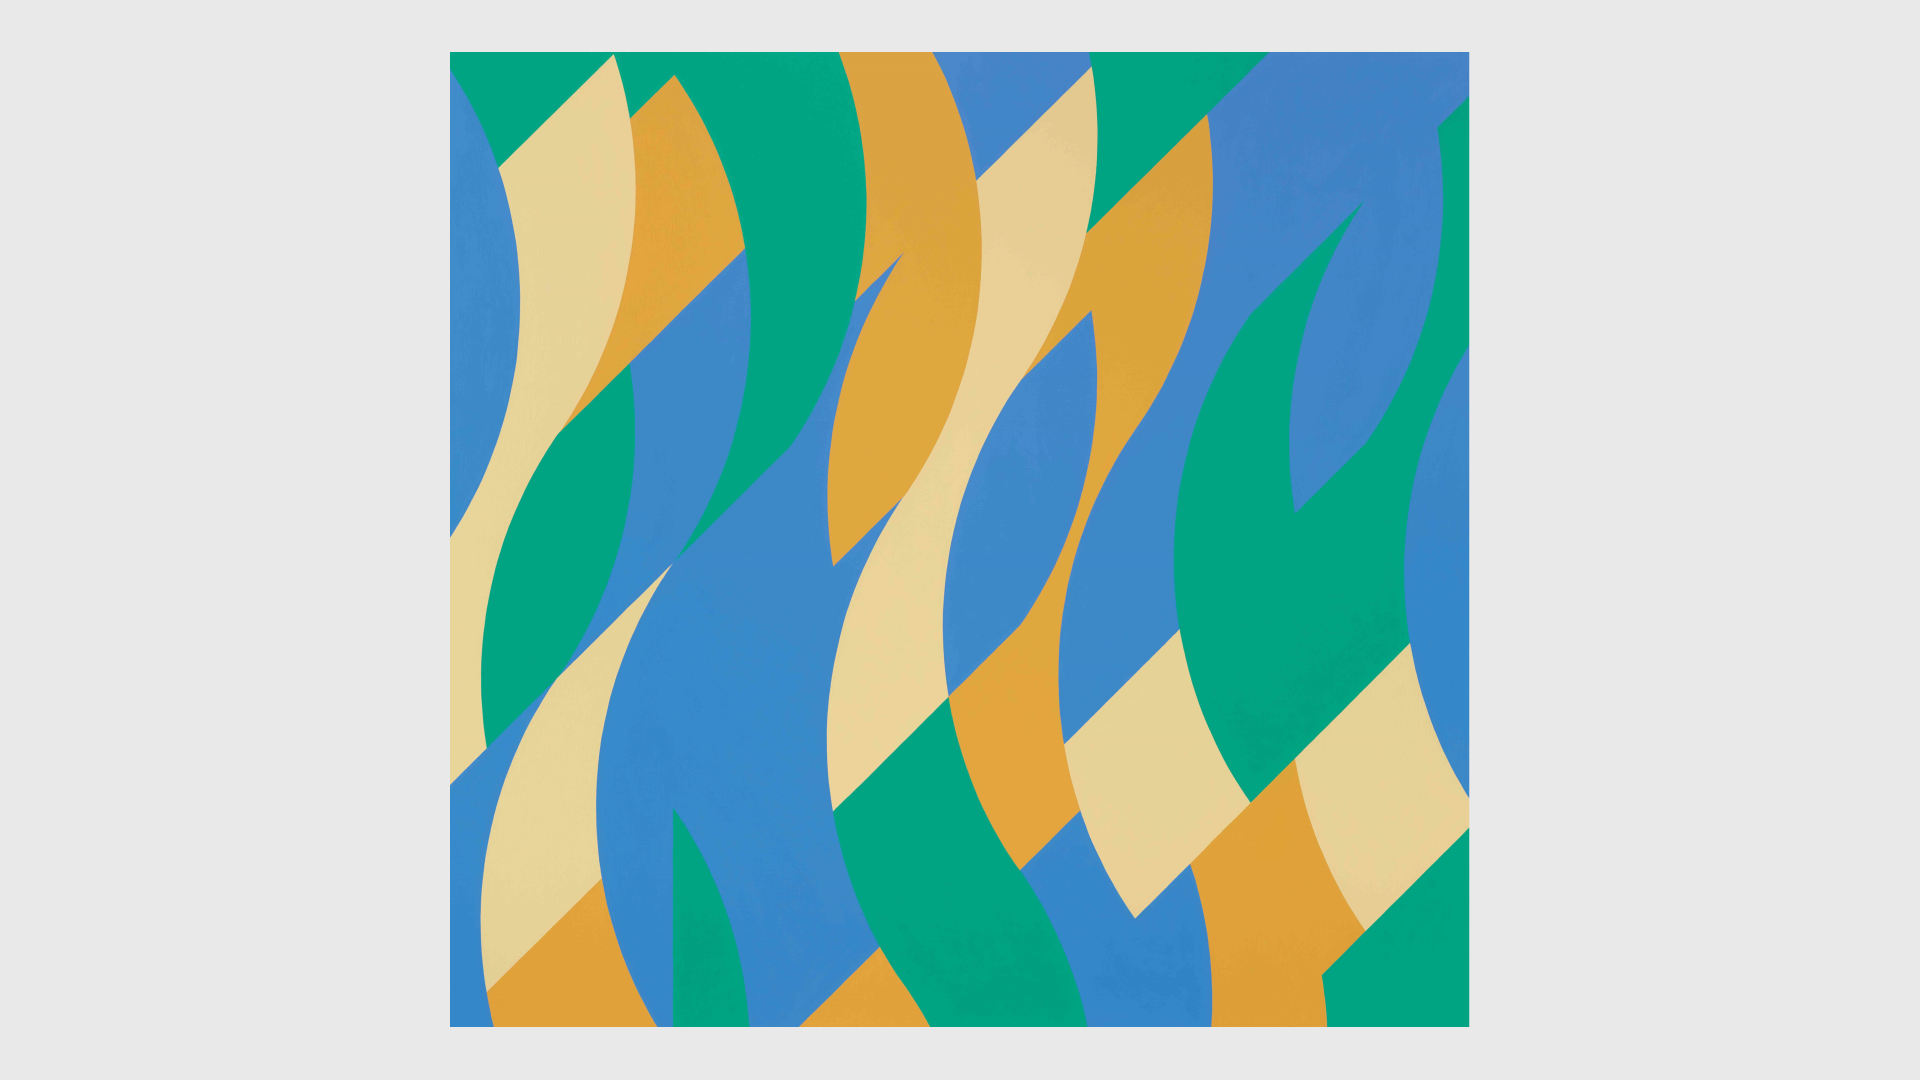 A painting by Bridget Riley, titled Rȇve, dated 1999.